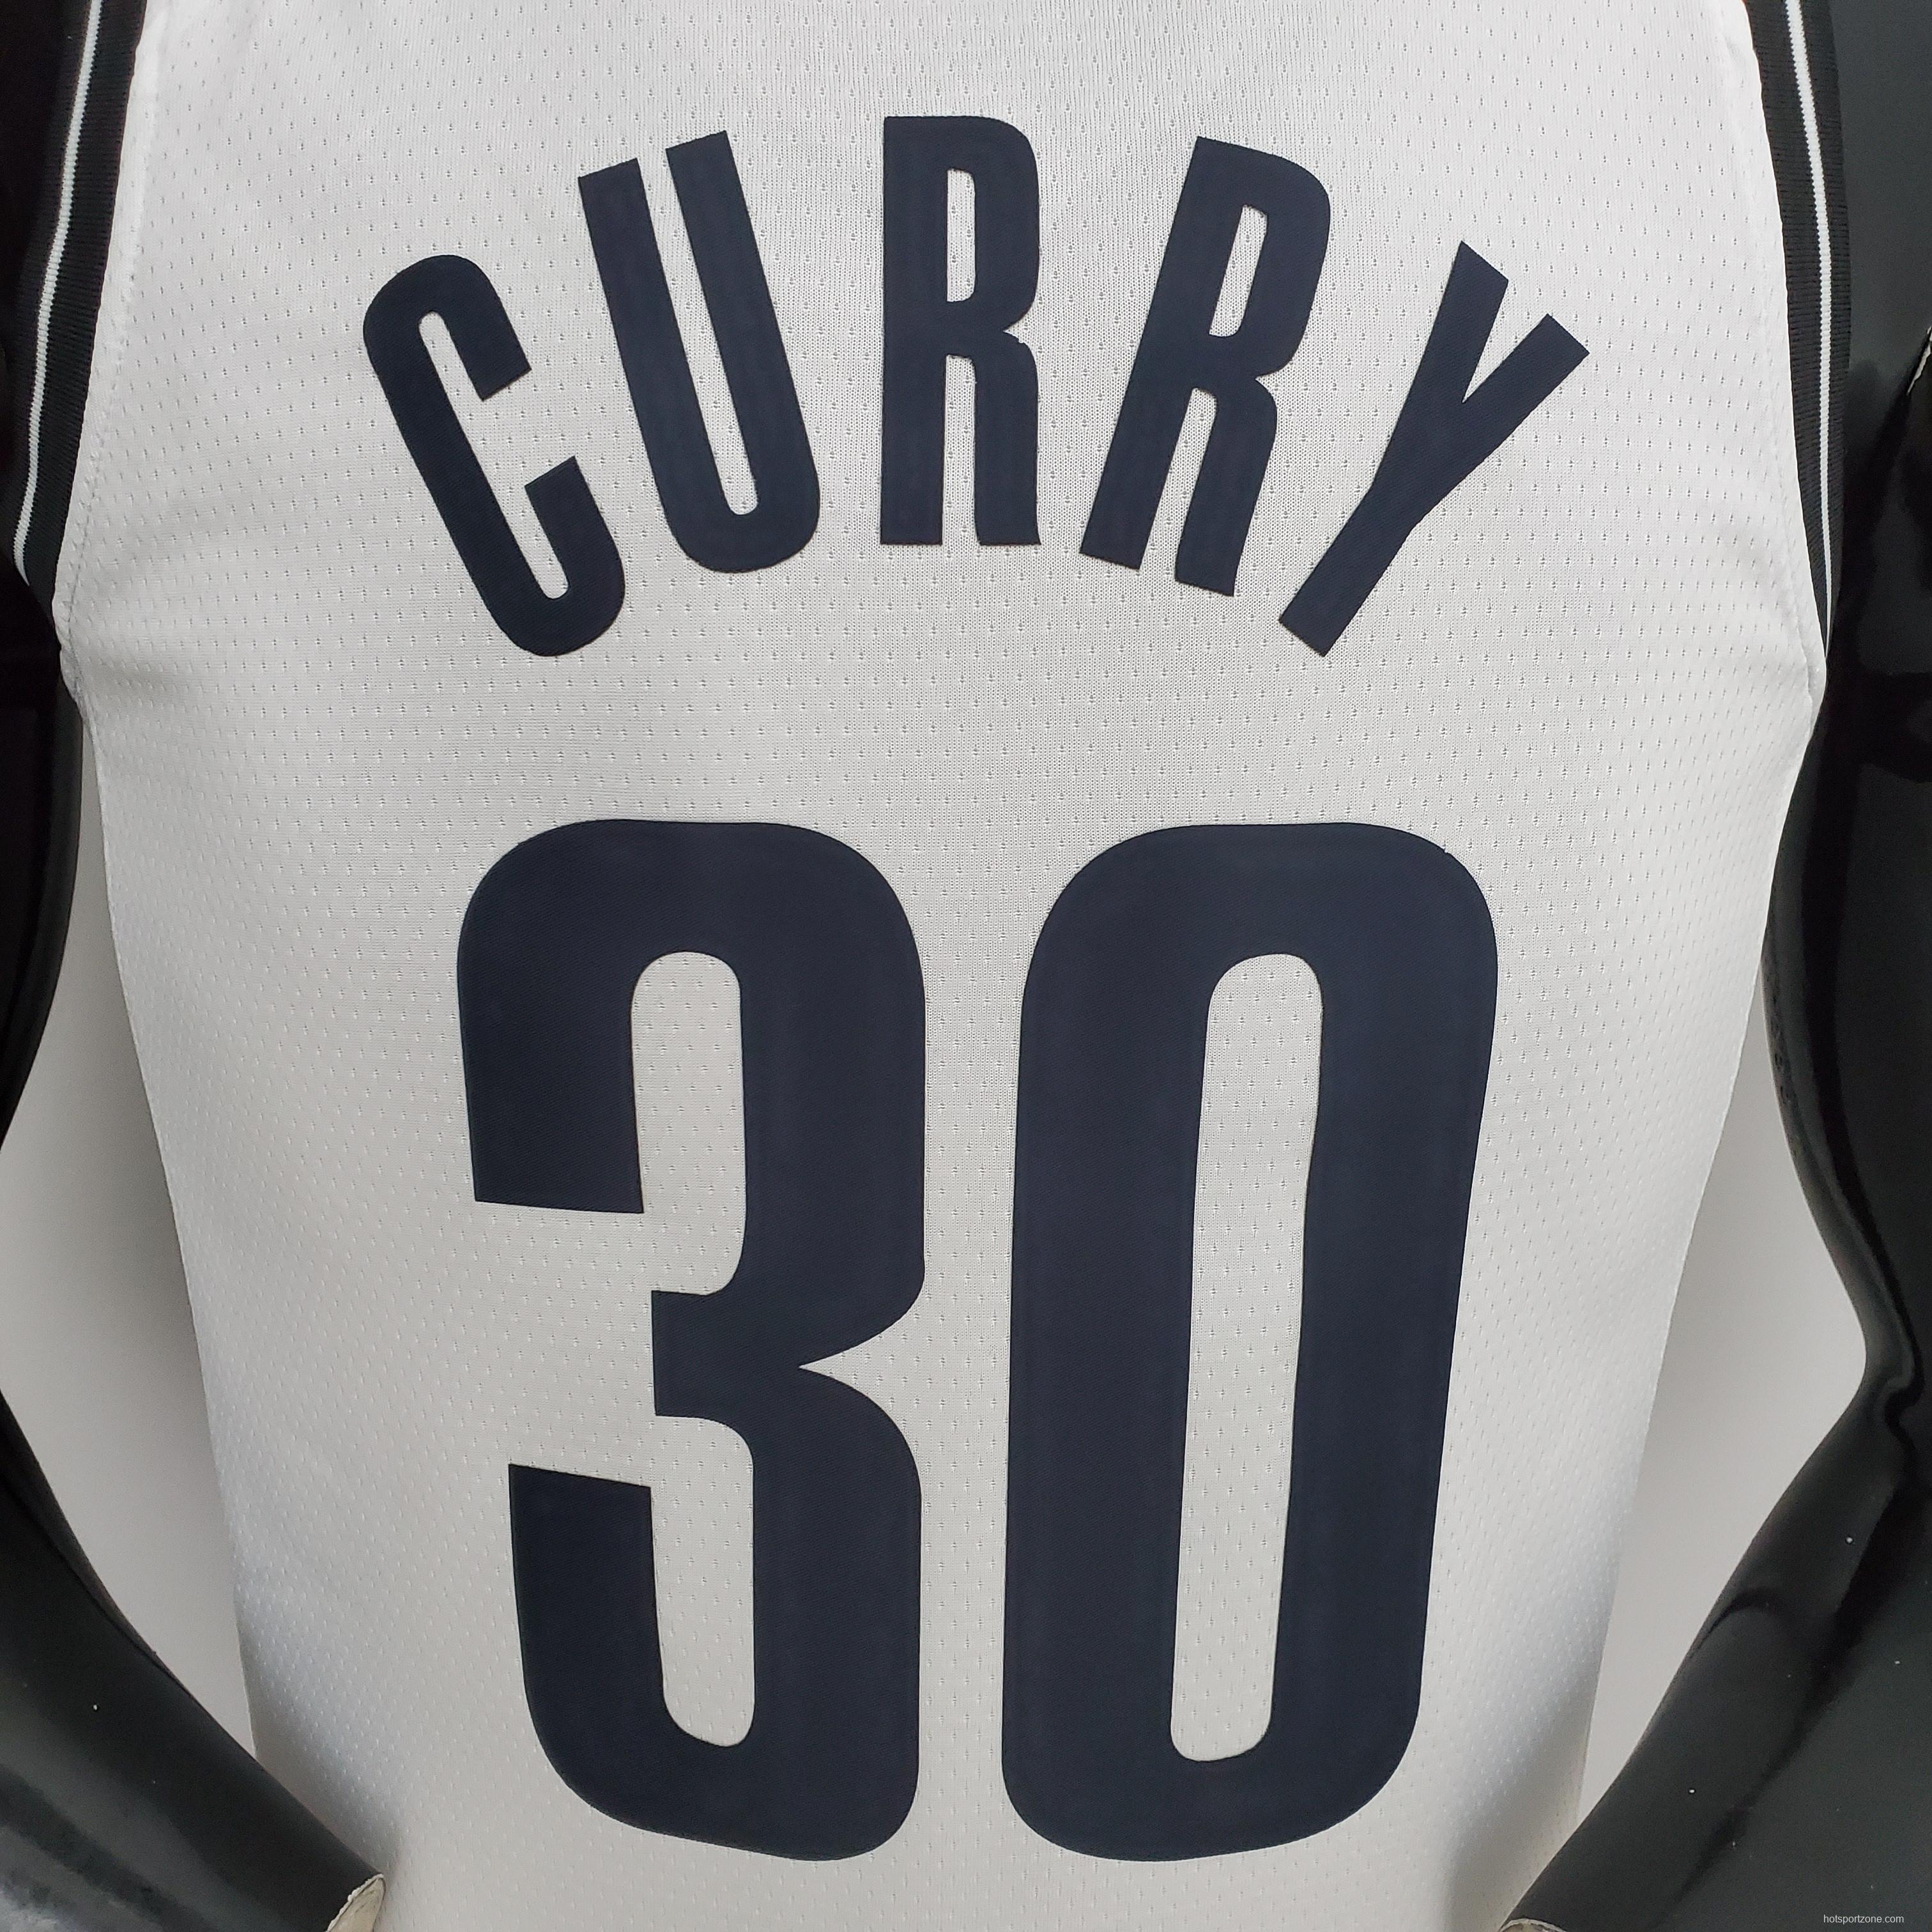 NBA 75th Anniversary Curry #30 Nets White Jersey